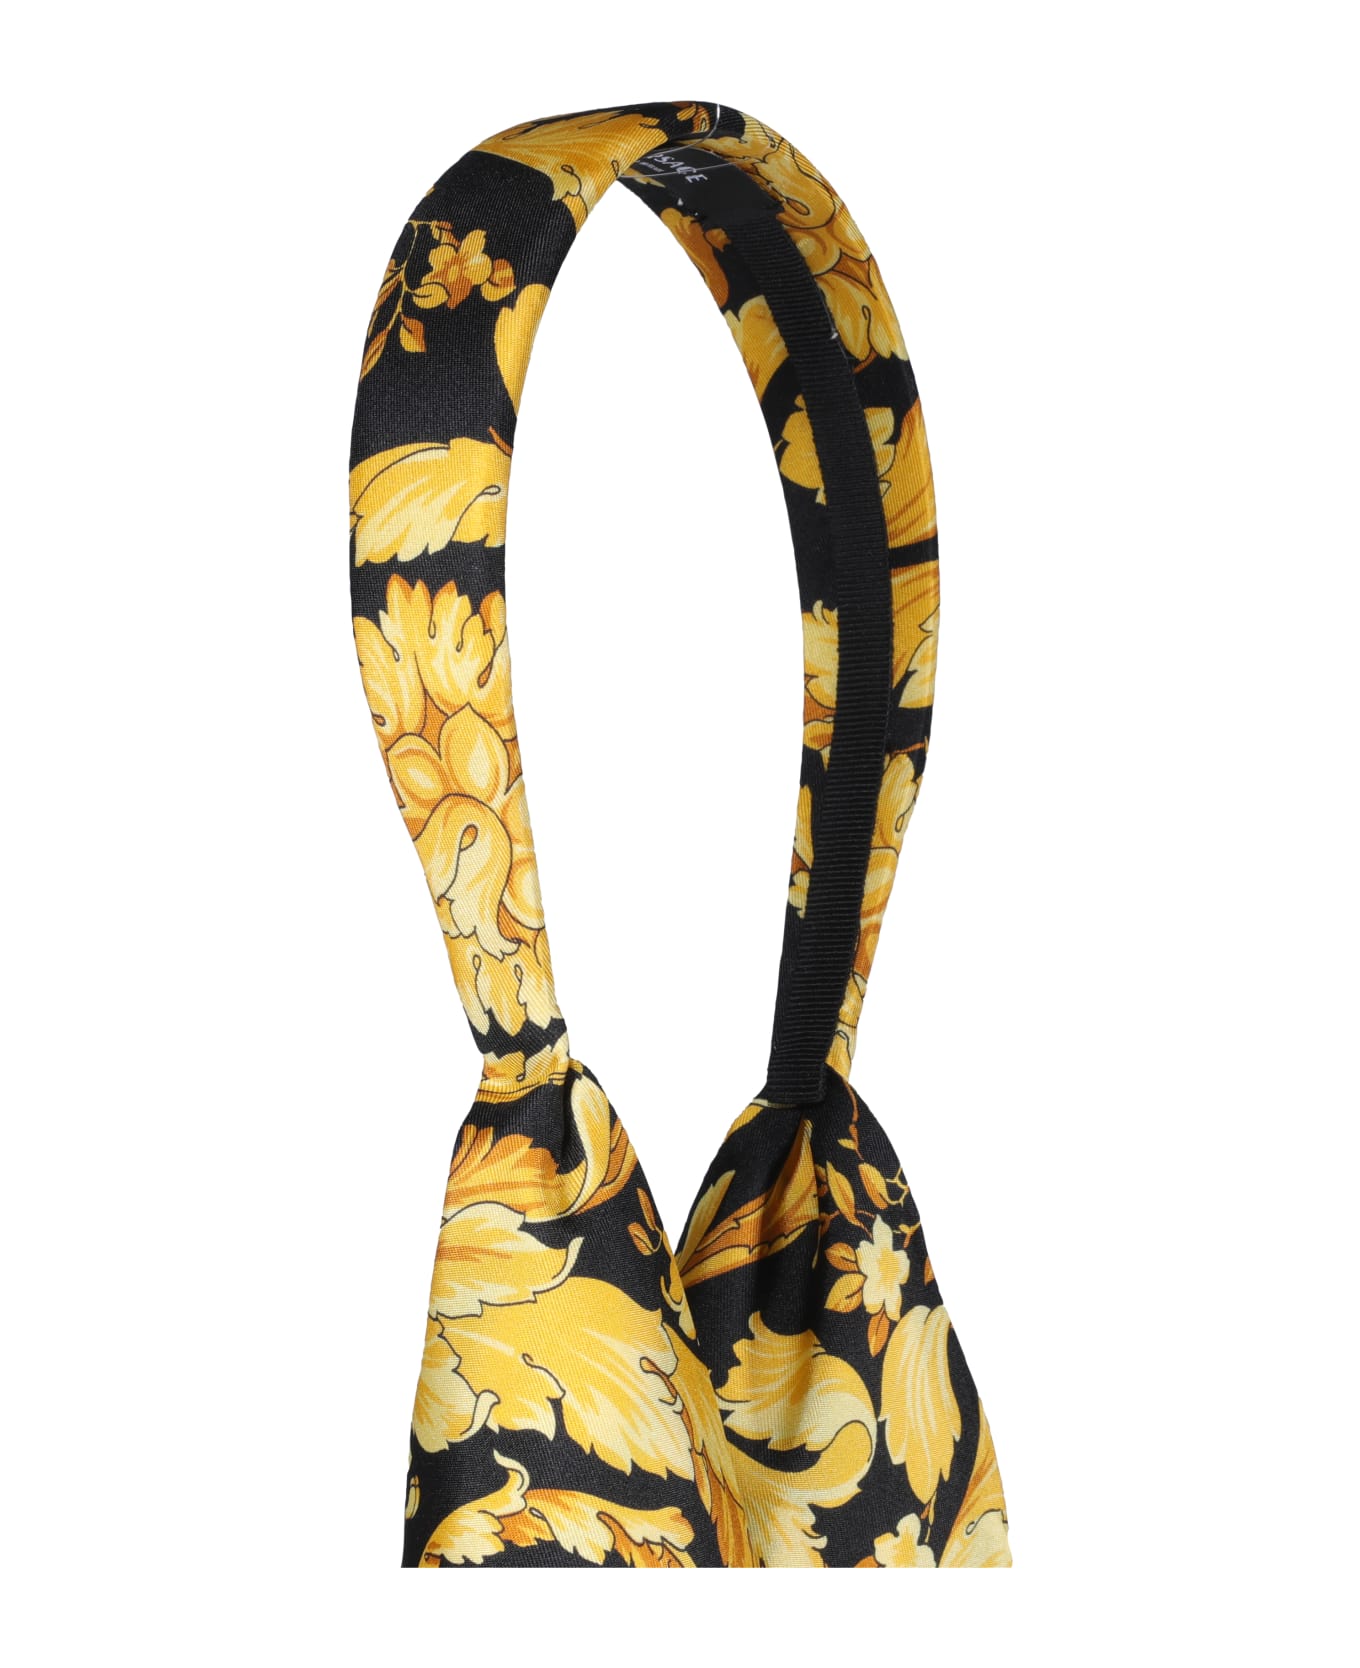 Versace Barocco Print Hair Accessories - Gold